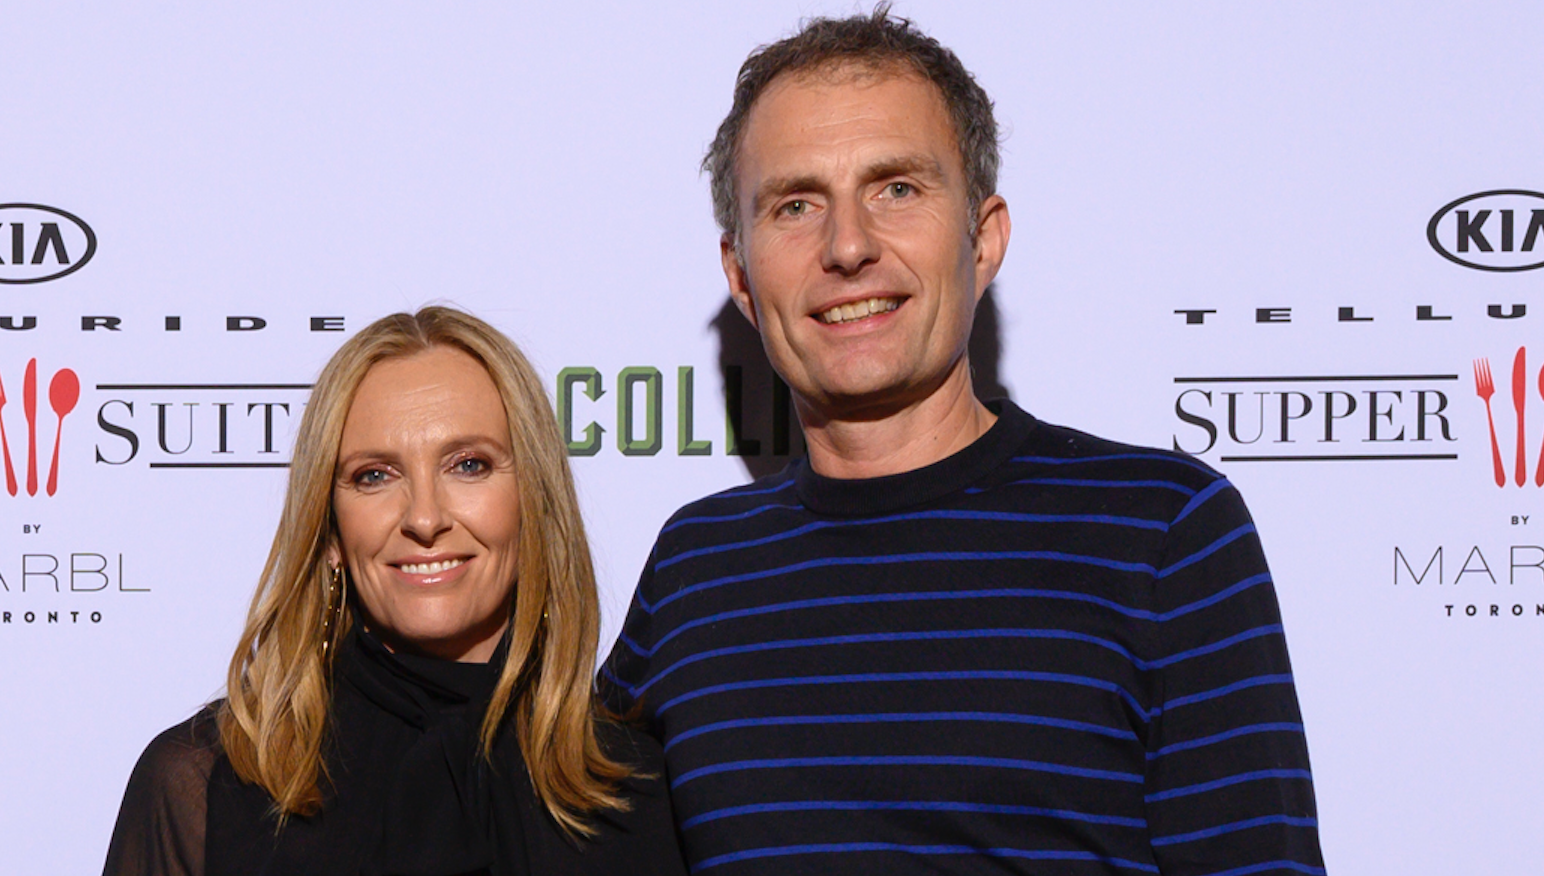 Toni Collette Euros Lyn On Inspirational True Story Behind Dream